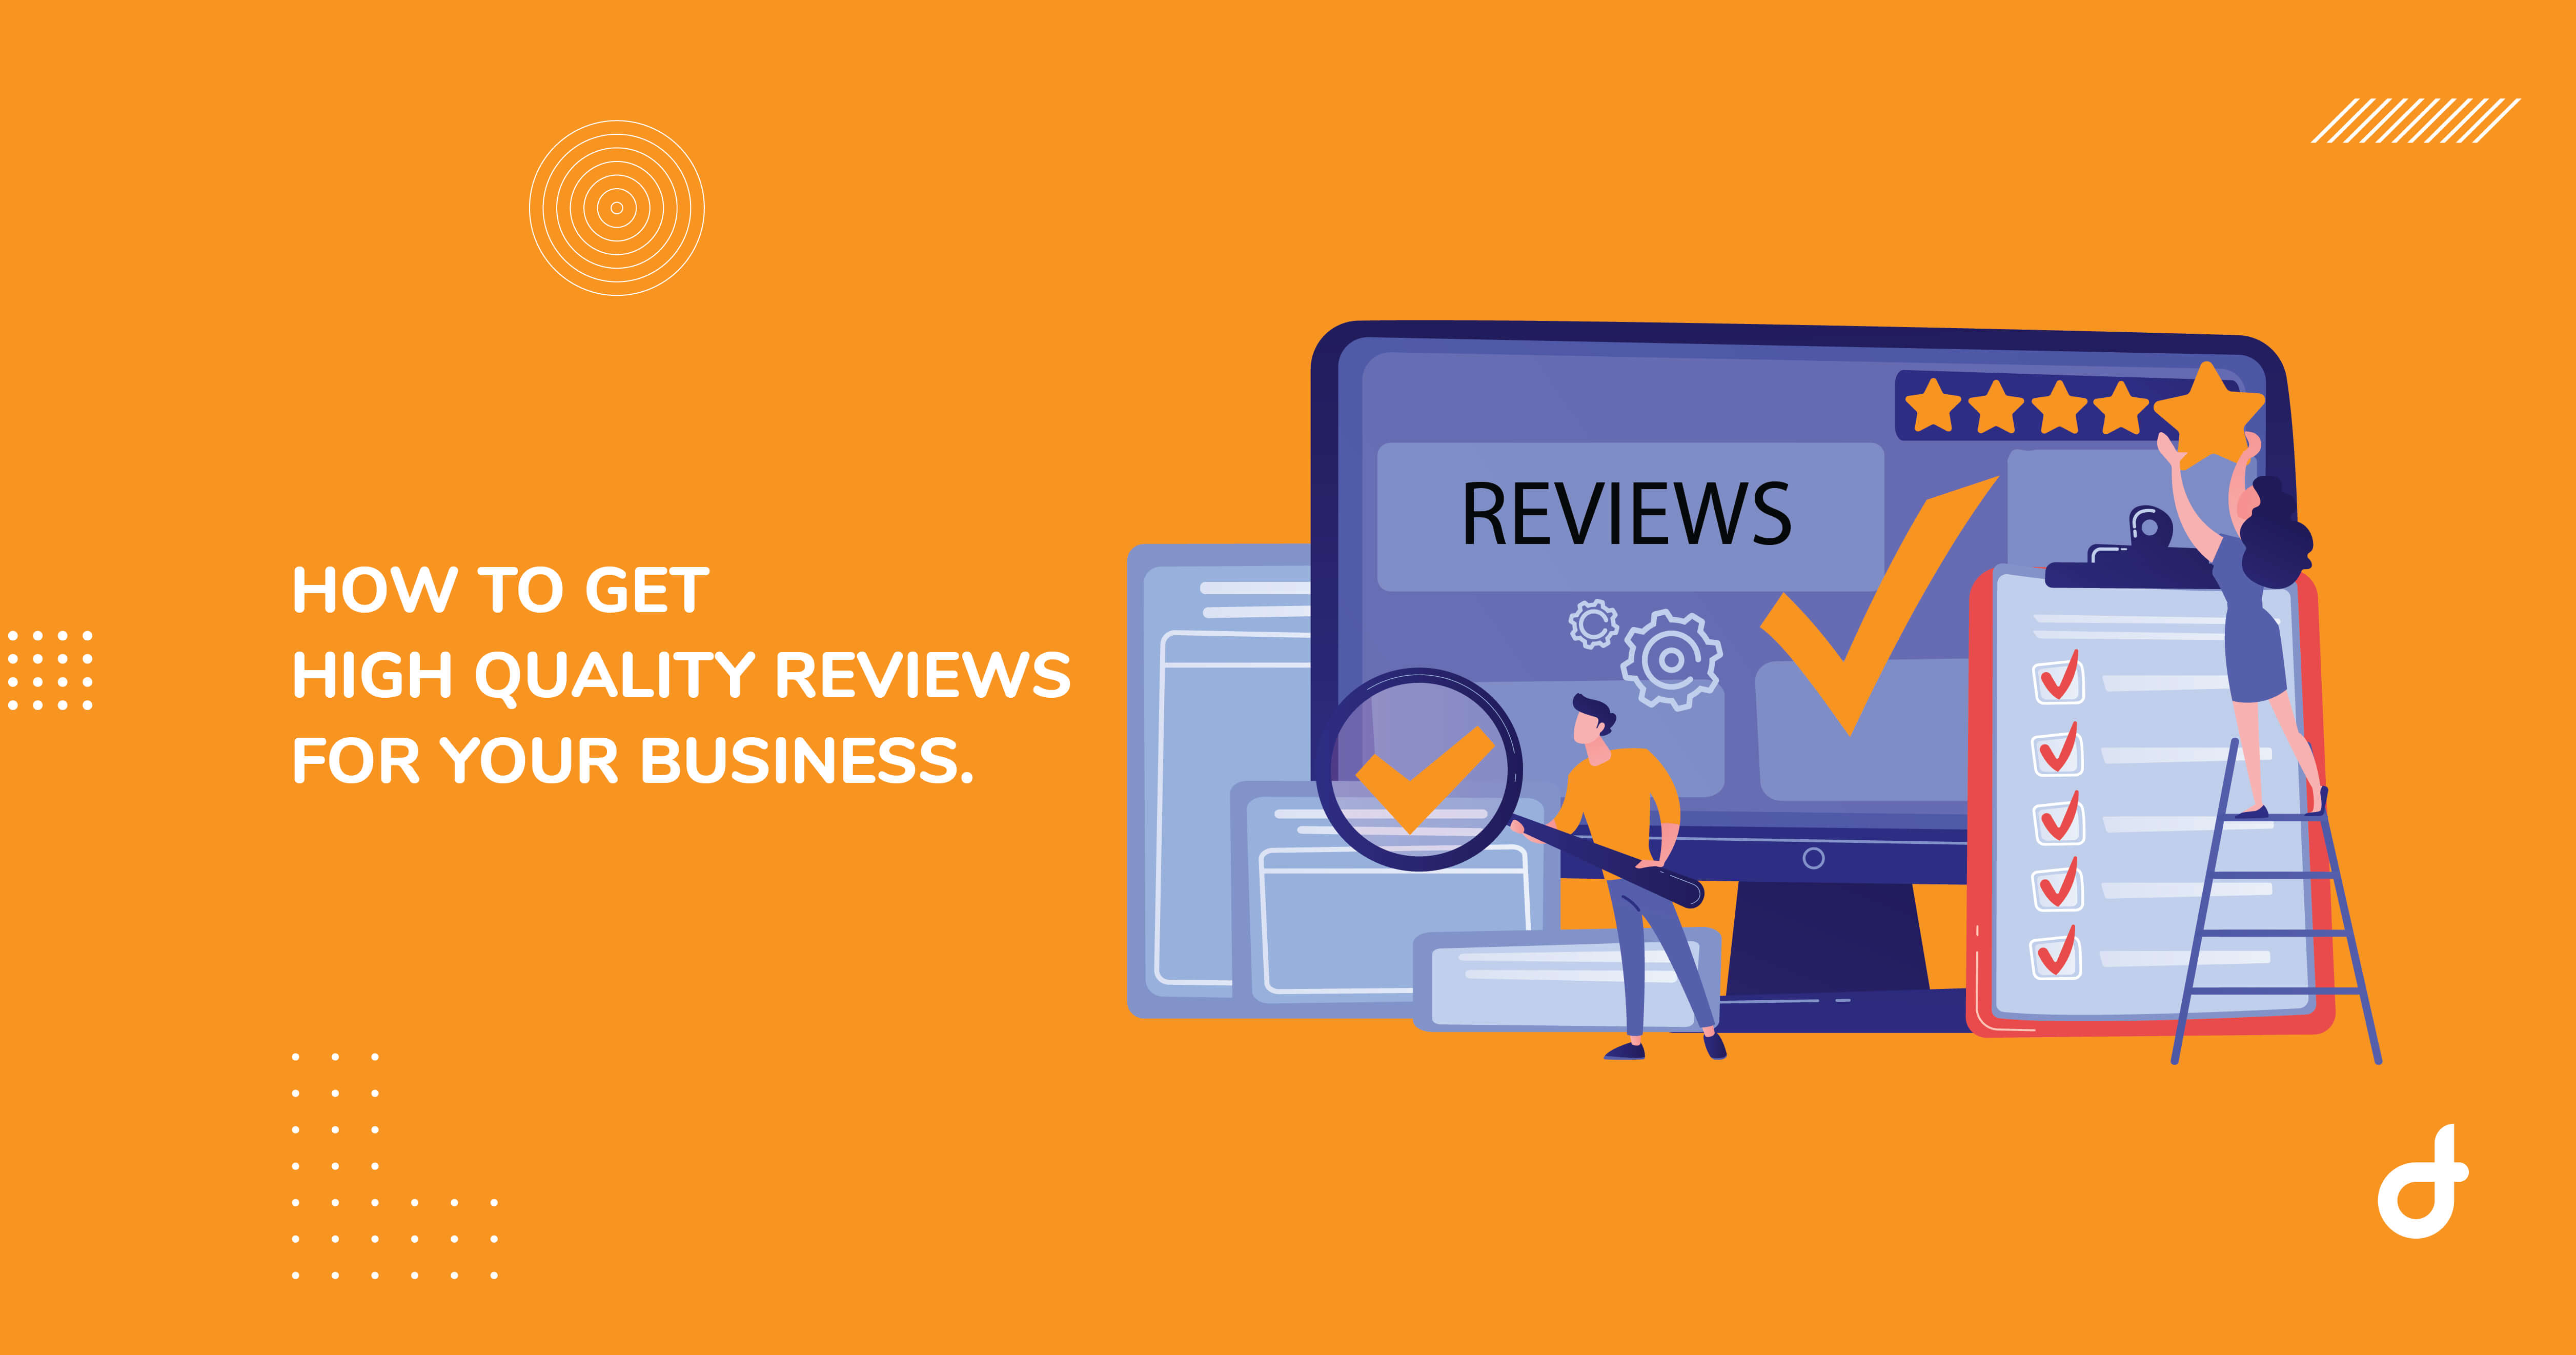 How To Get High Quality Reviews For Your Business?